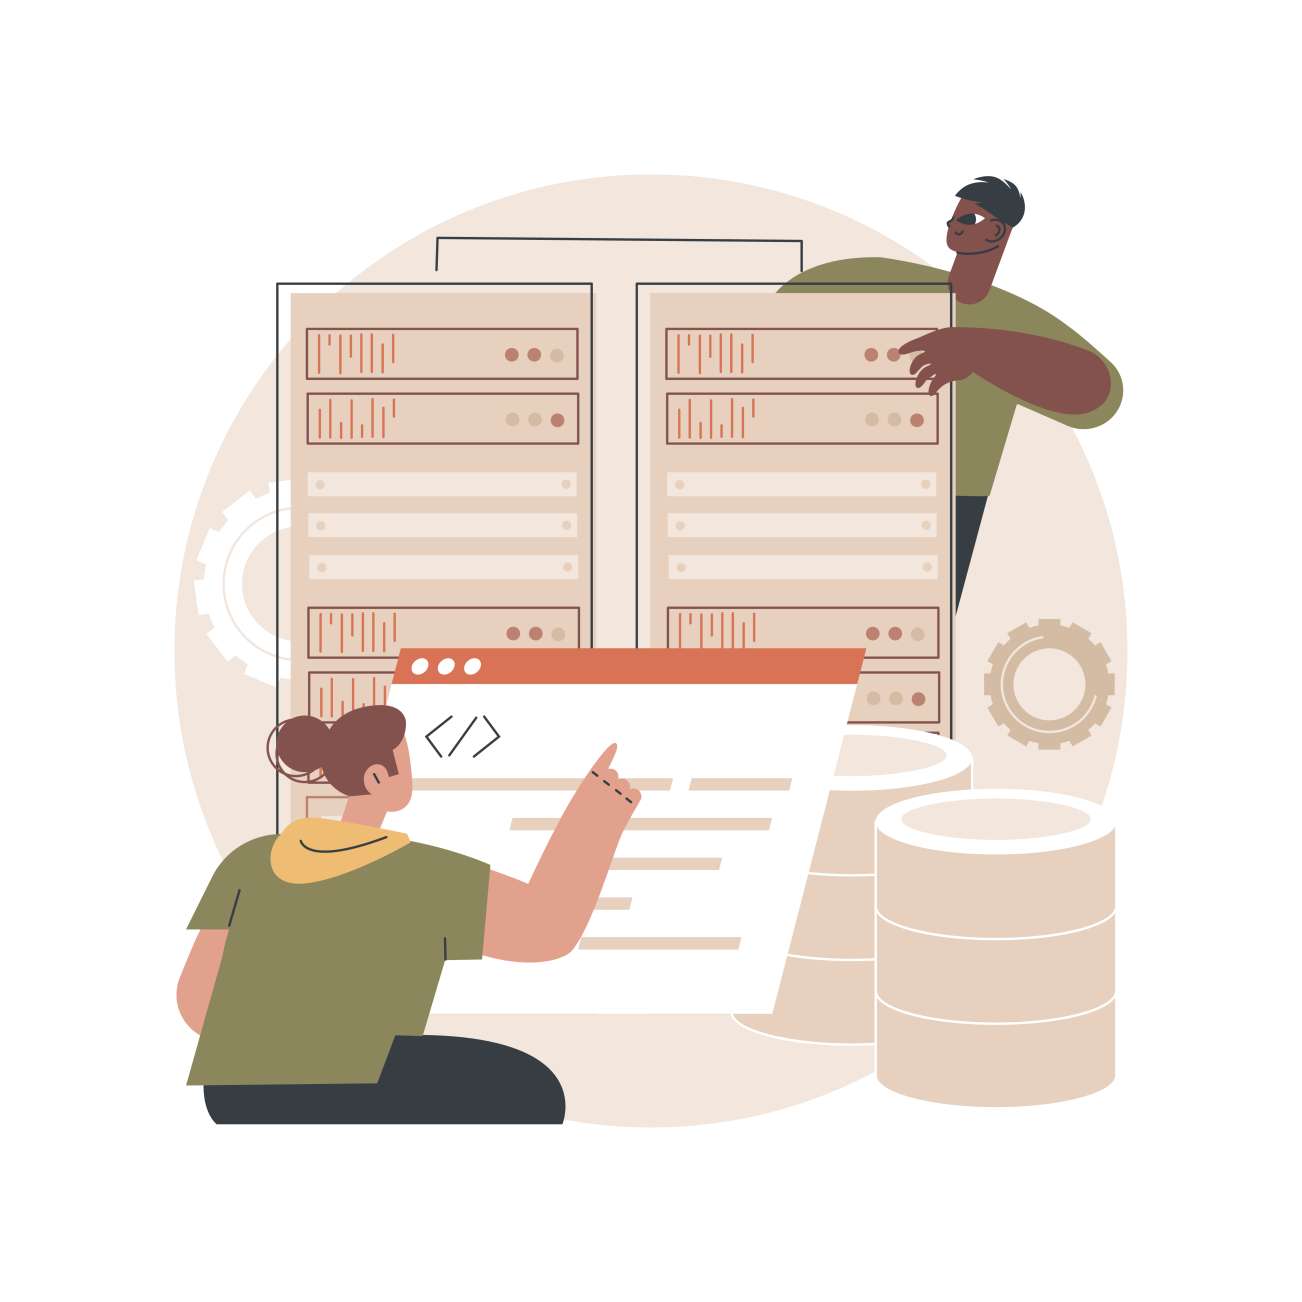 Discover the fundamentals of database scaling in microservices. This guide introduces microservices architecture, database scalability, and DevOps practices for optimal performance.
